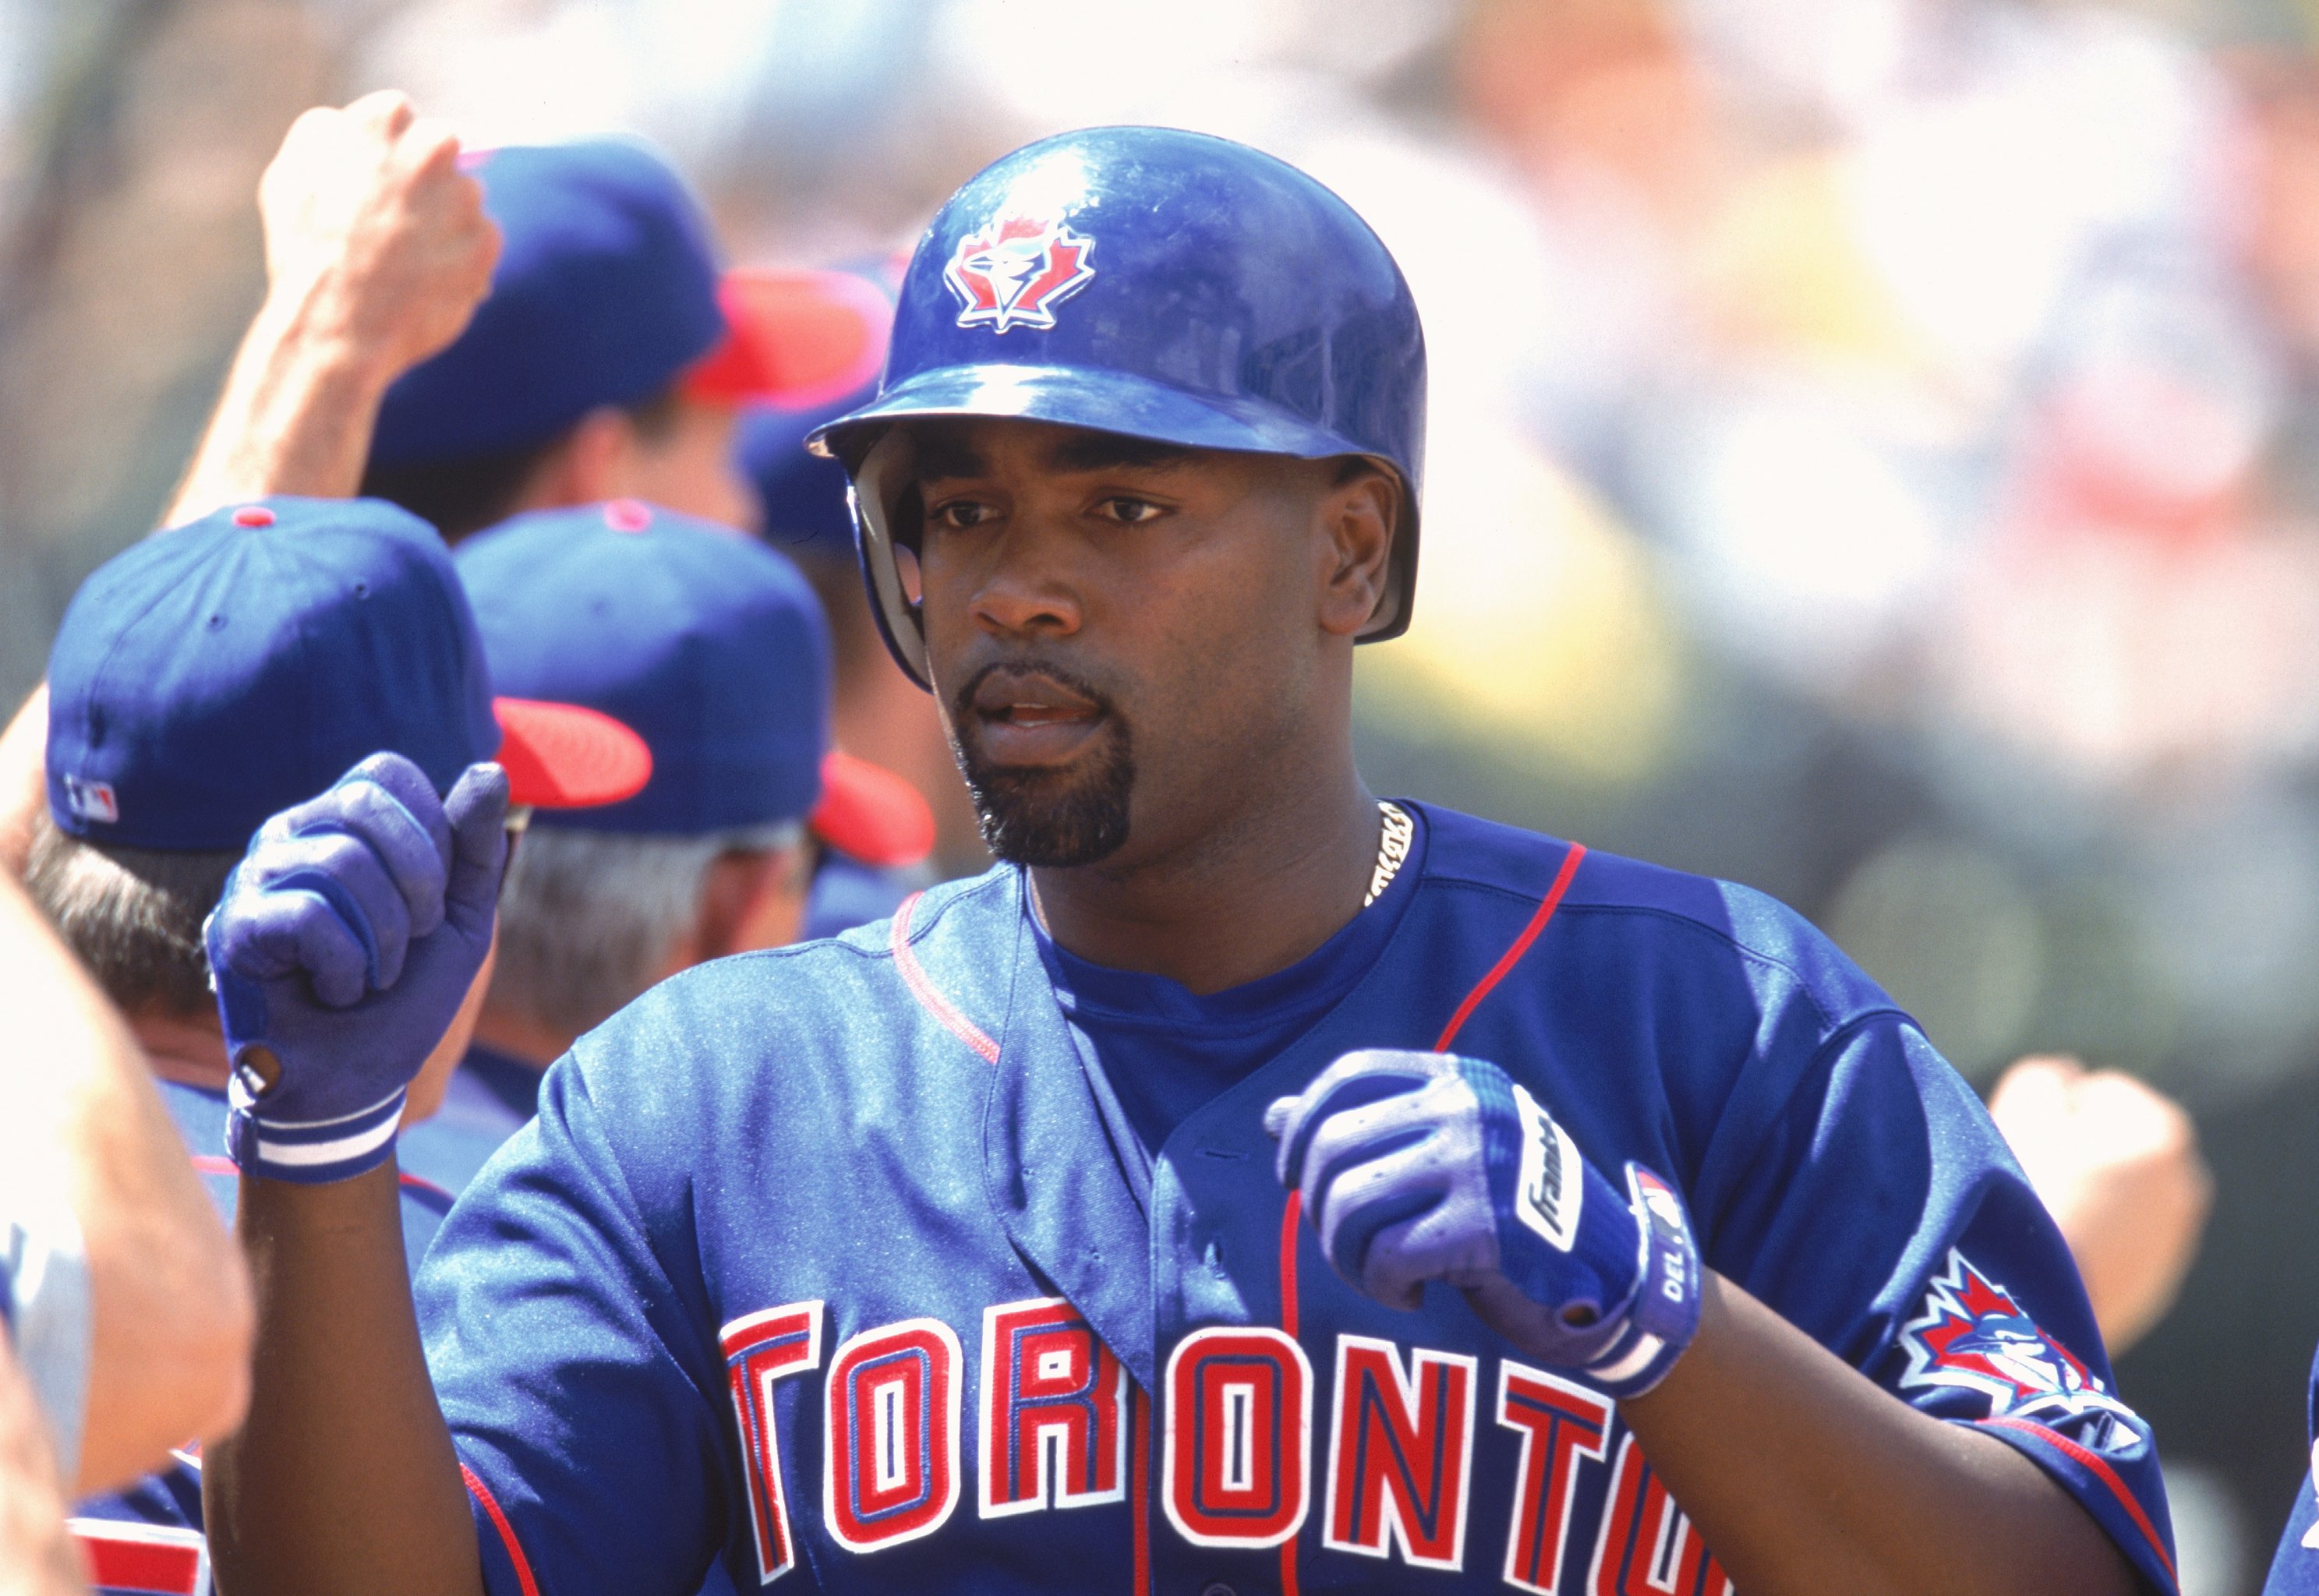 MLB on X: Fred McGriff and Wade Boggs were teammates on the first